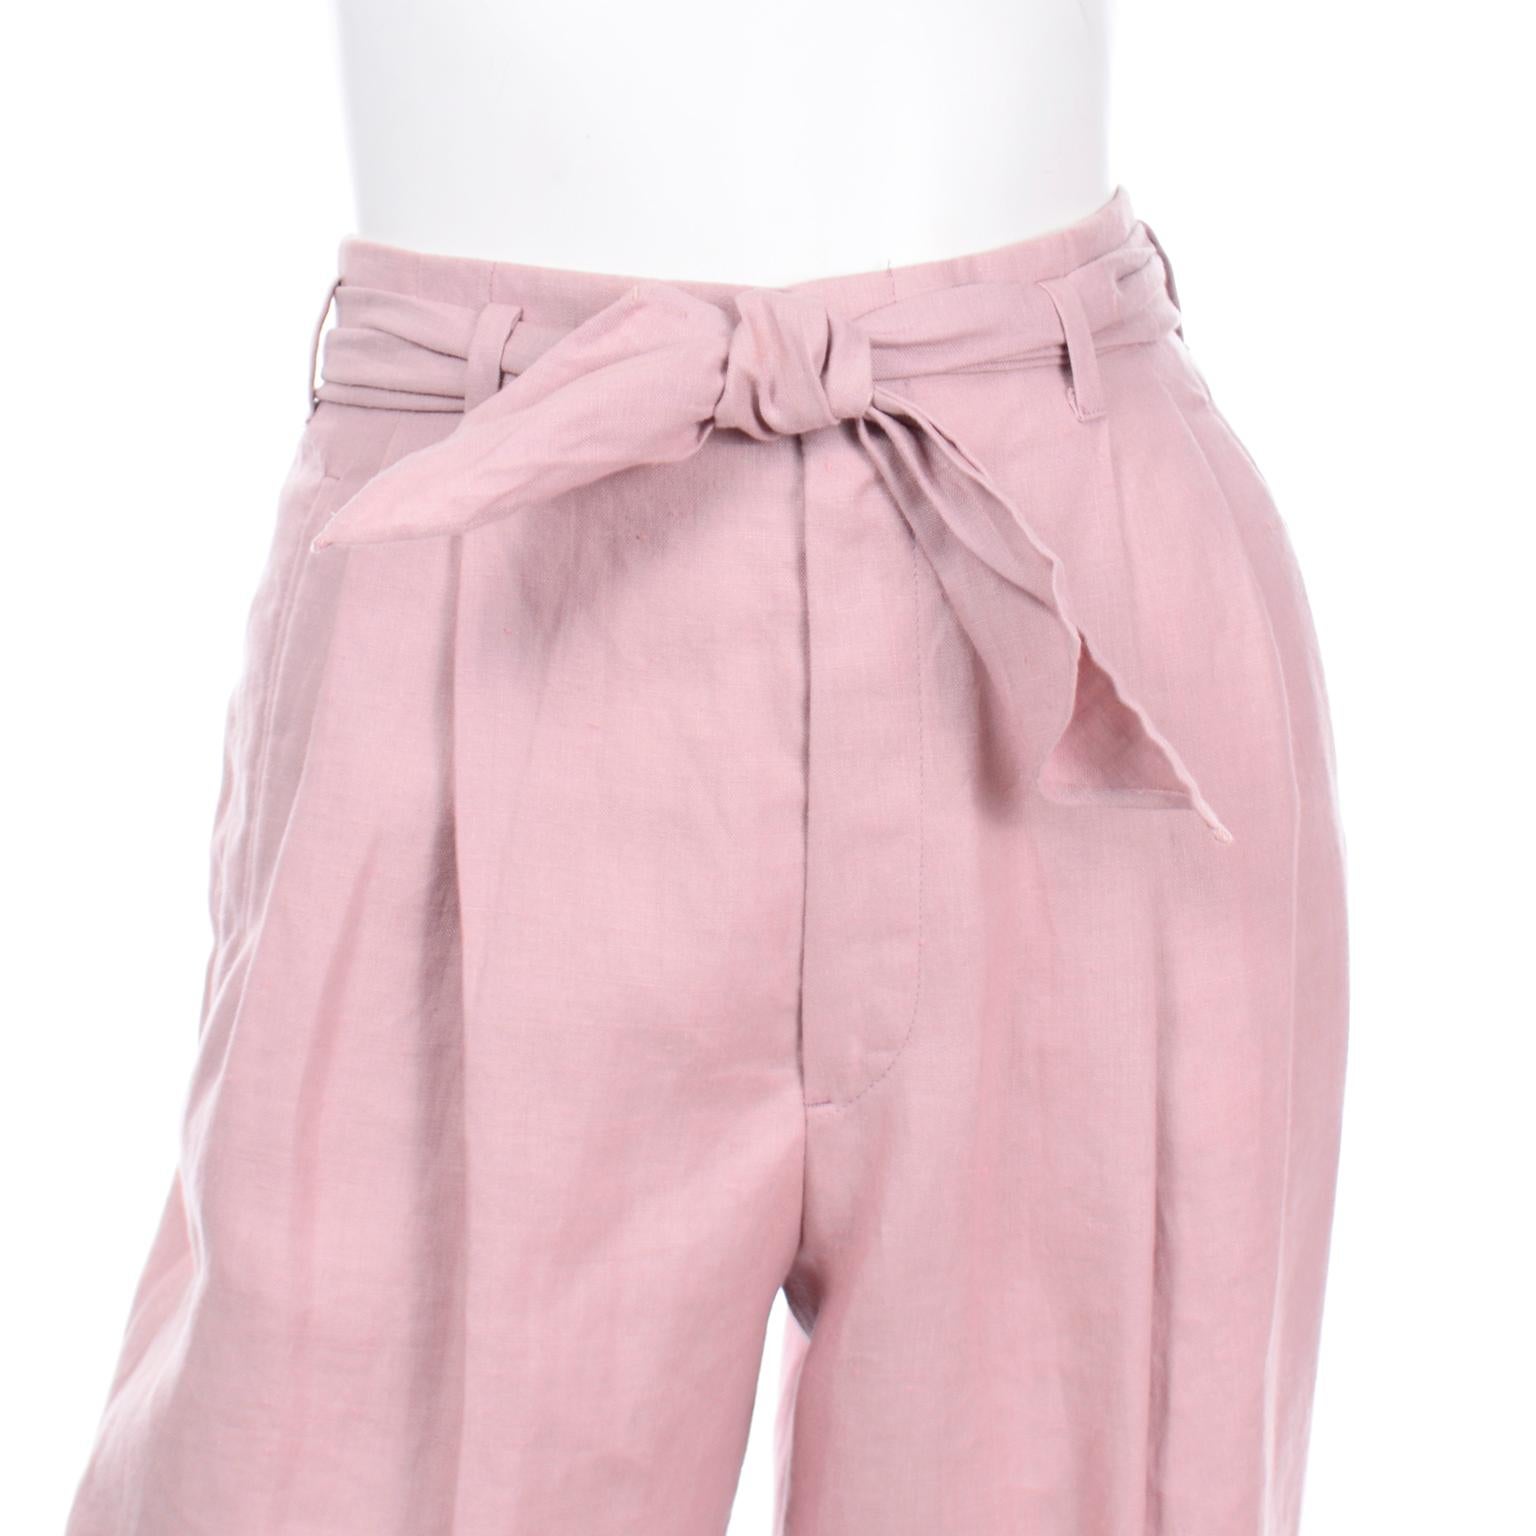 Ralph Lauren Pink Linen Vintage High Waisted Trousers With Sash Belt In Excellent Condition For Sale In Portland, OR